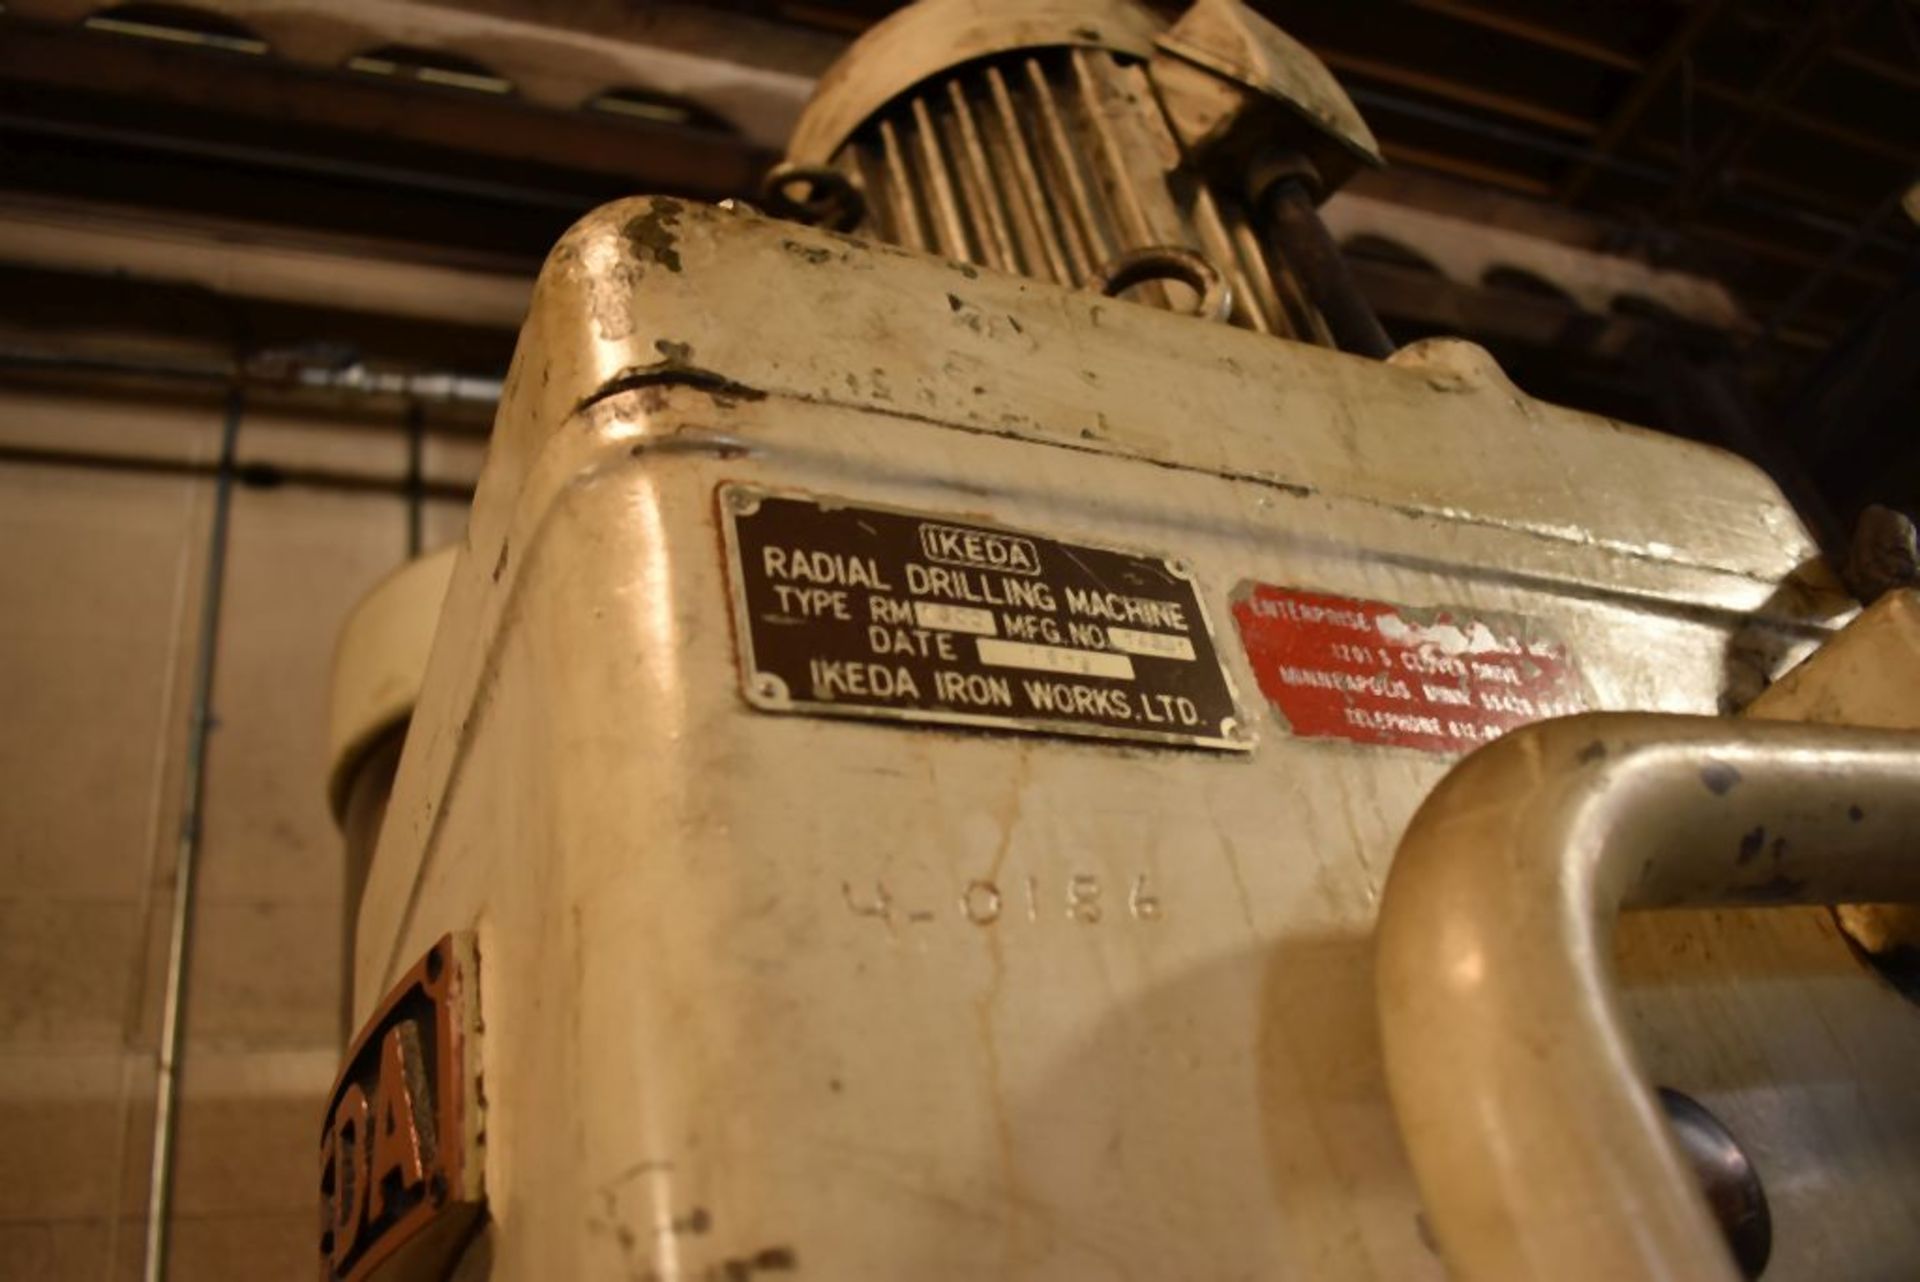 1975 IKEDA RADIAL ARM DRILL, MODEL RM-1300, S/N: 74331, 13" COLUMN x 60" ARM, 20" x 20" T-SLOT 90 - Image 3 of 3